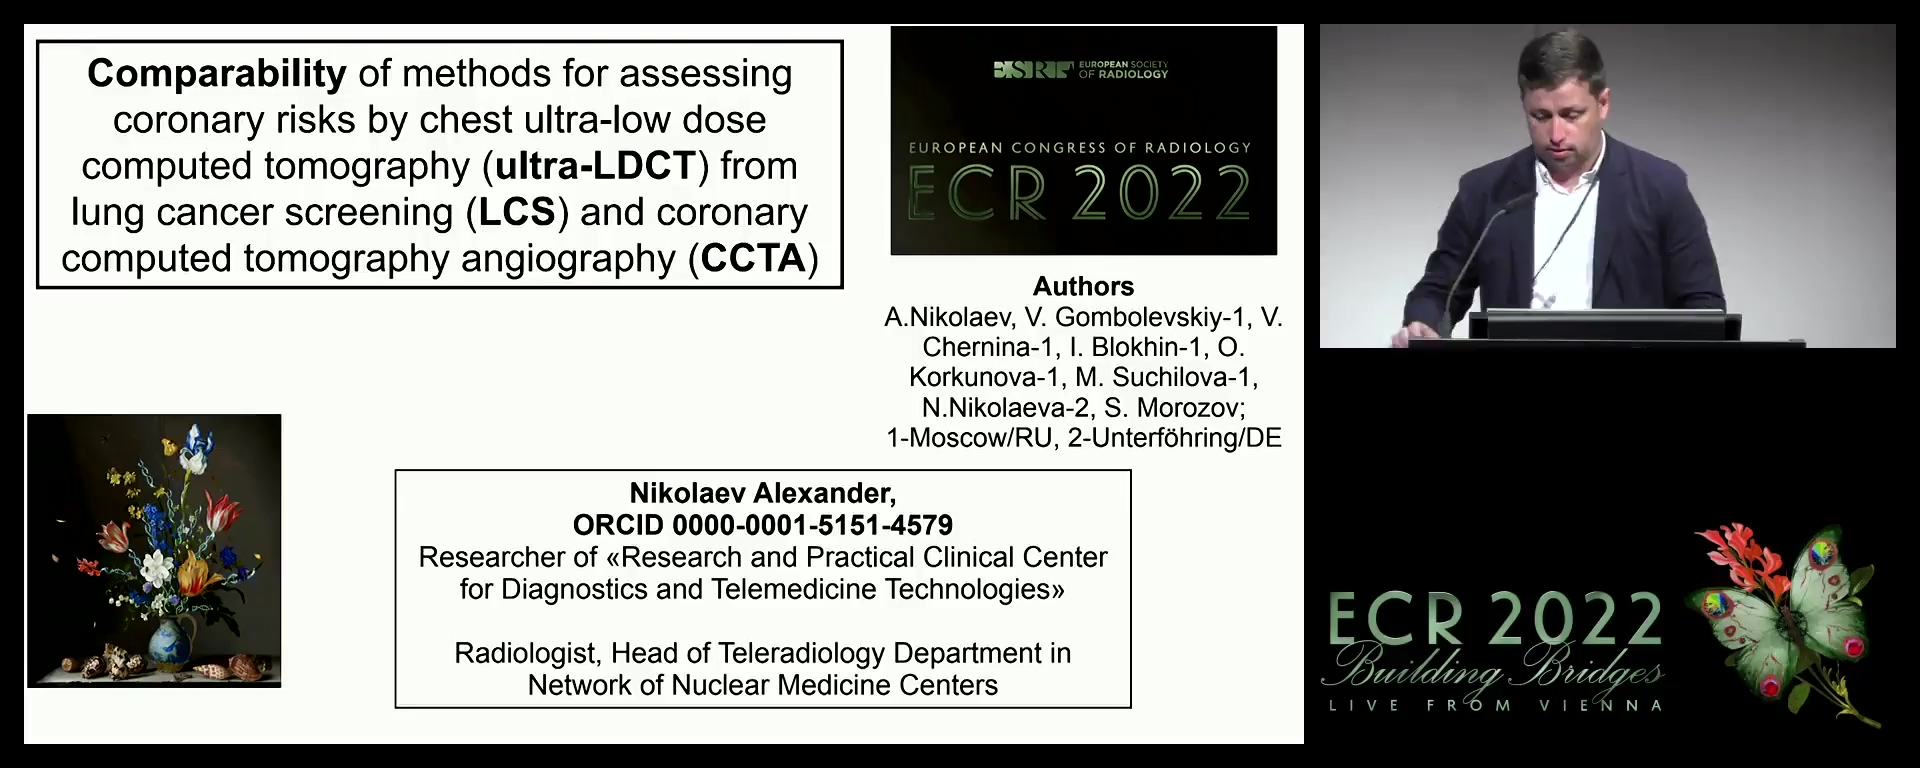 Comparability of methods for assessing coronary risks by chest ultra-low dose computed tomography (ultra-LDCT) from lung cancer screening (LCS) and coronary computed tomography angiography (CCTA) - Alexander Nikolaev, Moscow / RU